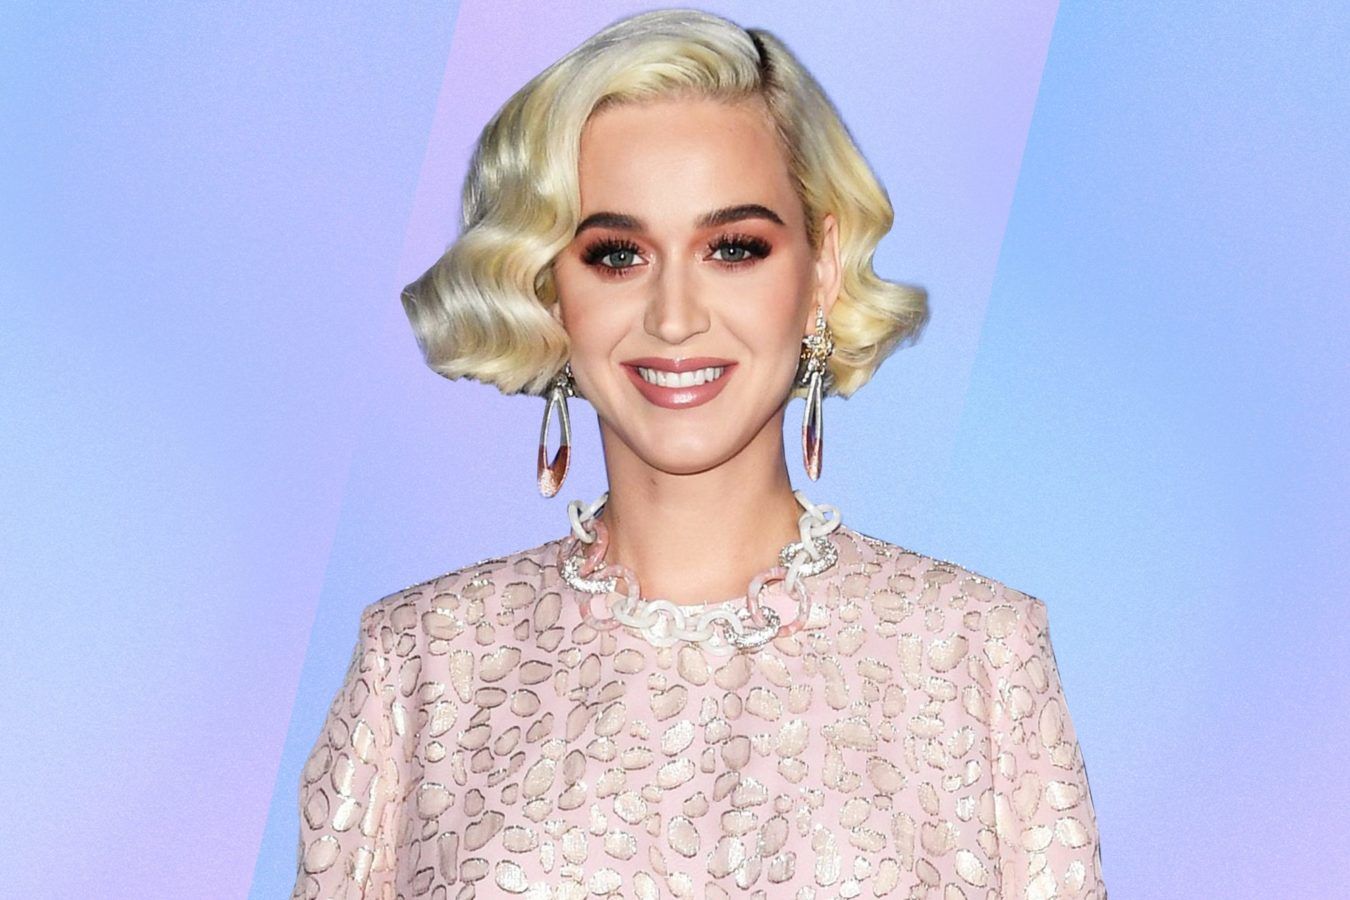 Katy Perry explained why she goes through ‘phases’ without drinking